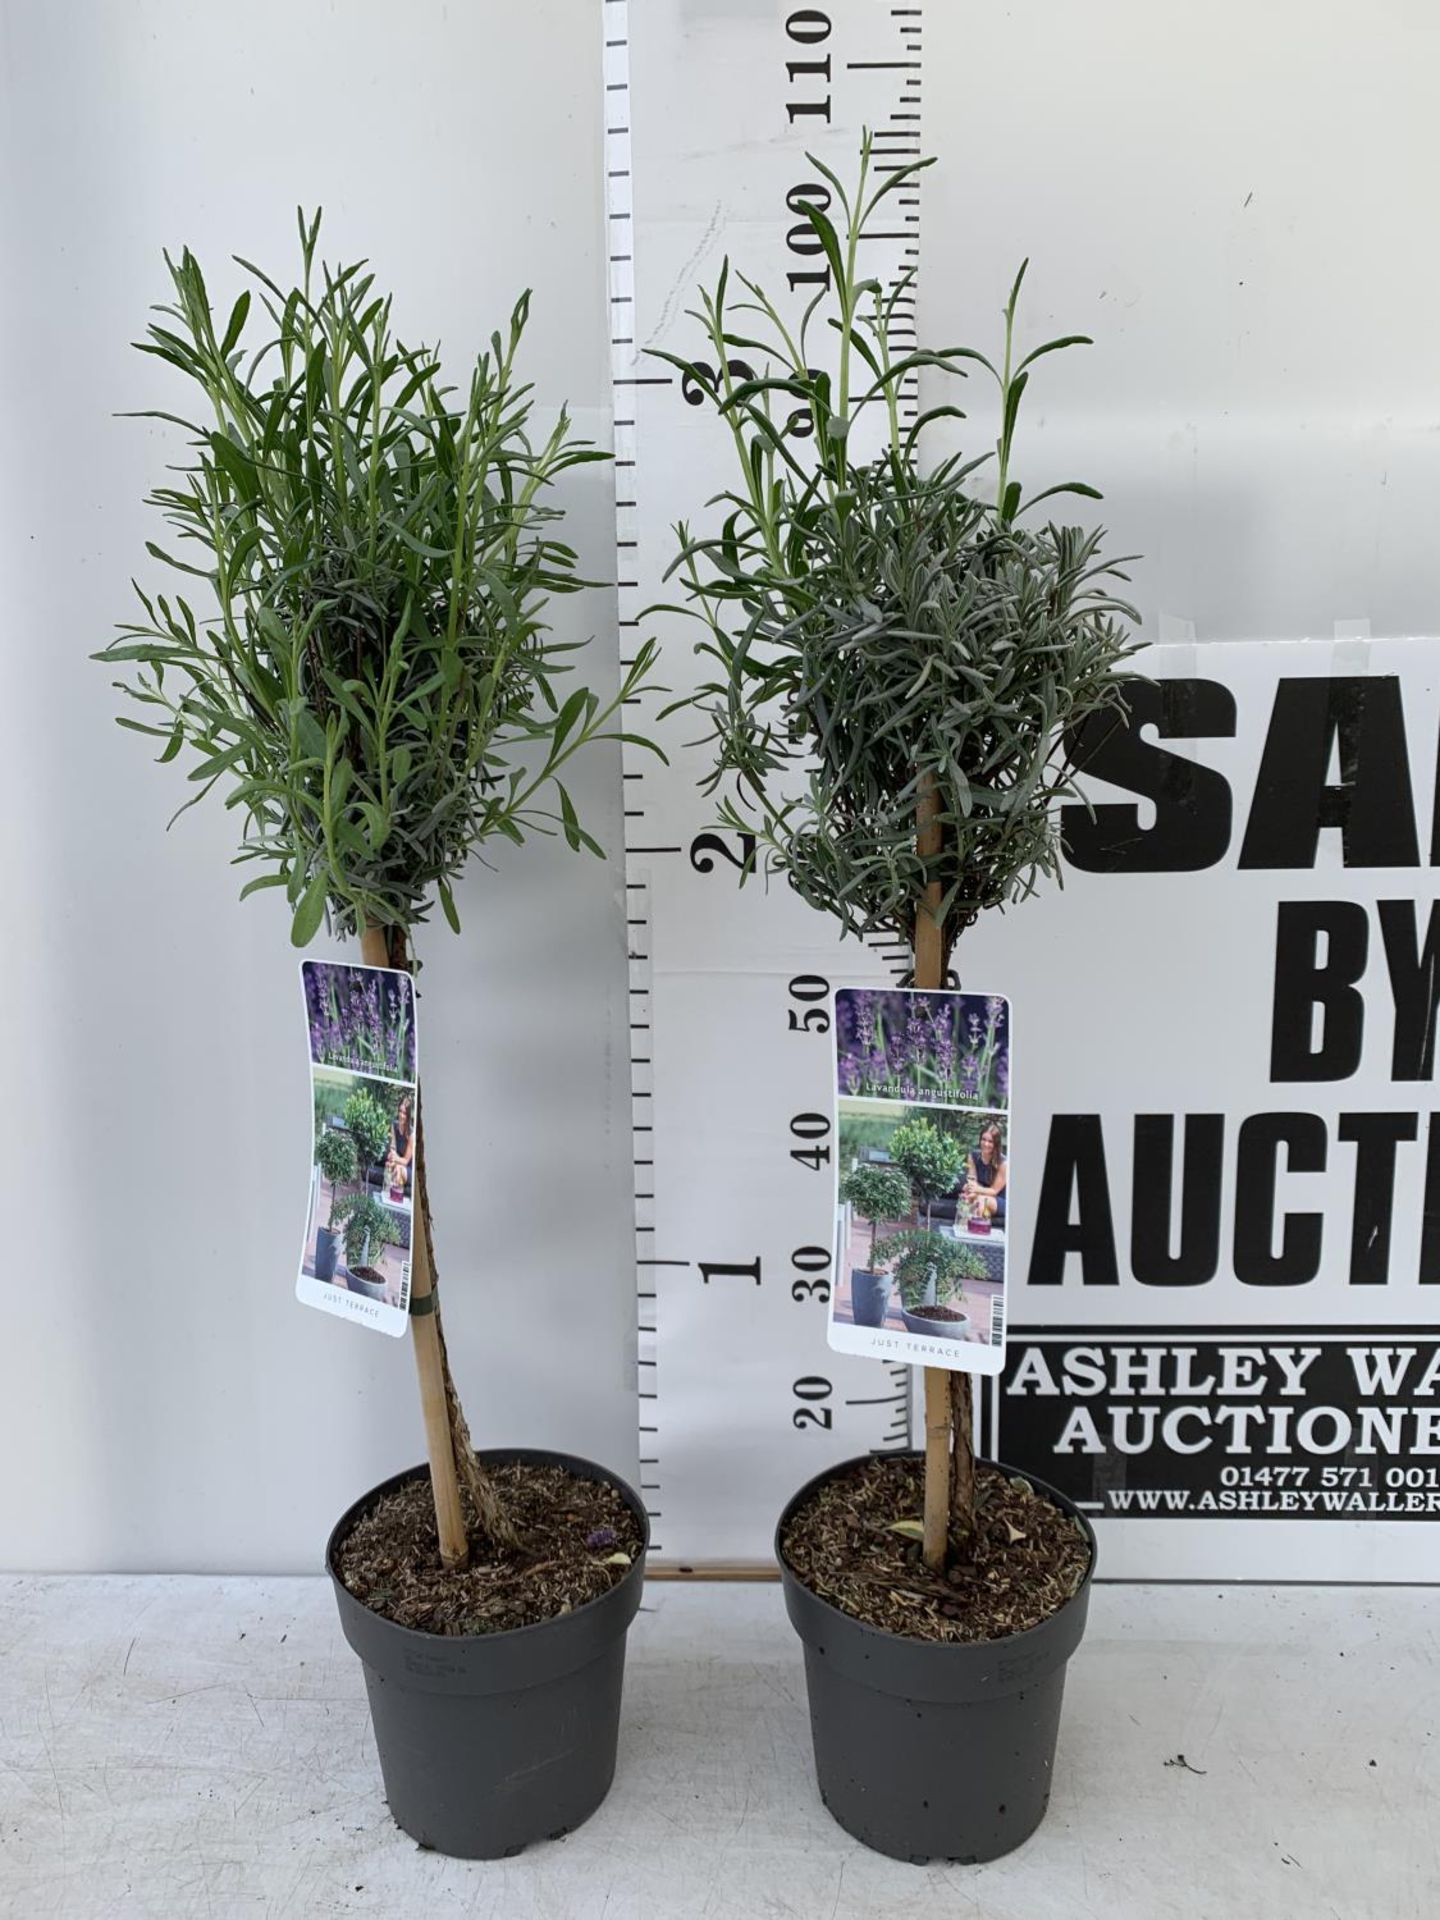 TWO LAVENDER 'AUSUGTFOLIA' STANDARD TREES APPROX 90CM IN HEIGHT IN 3LTR POTS PLUS VAT TO BE SOLD FOR